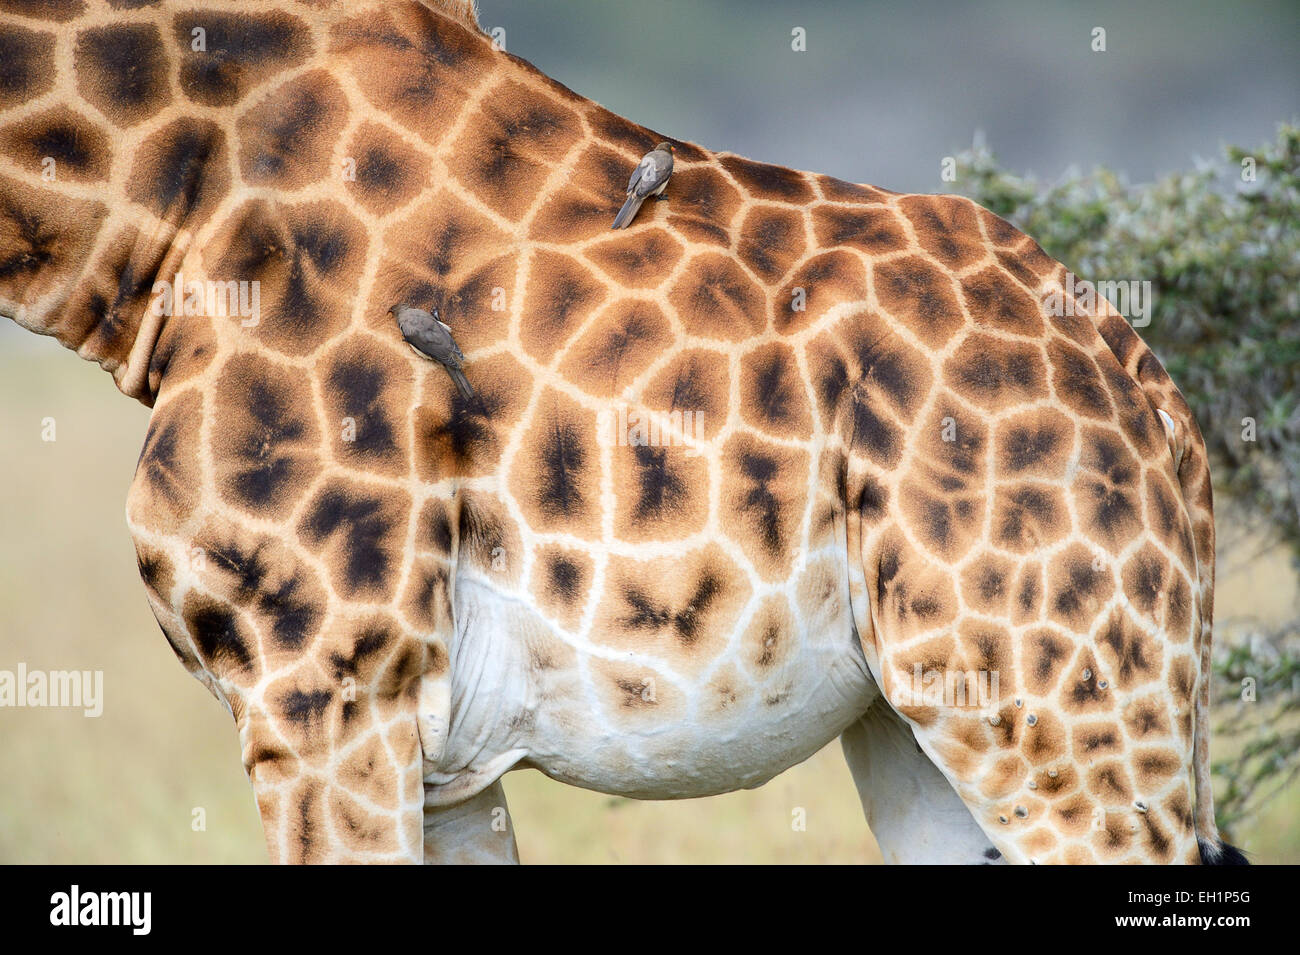 Rothschild’s Giraffe (Giraffa camelopardalis rothschildi), detail view of the coat pattern, Oxpeckers (Buphagus) perched on Stock Photo